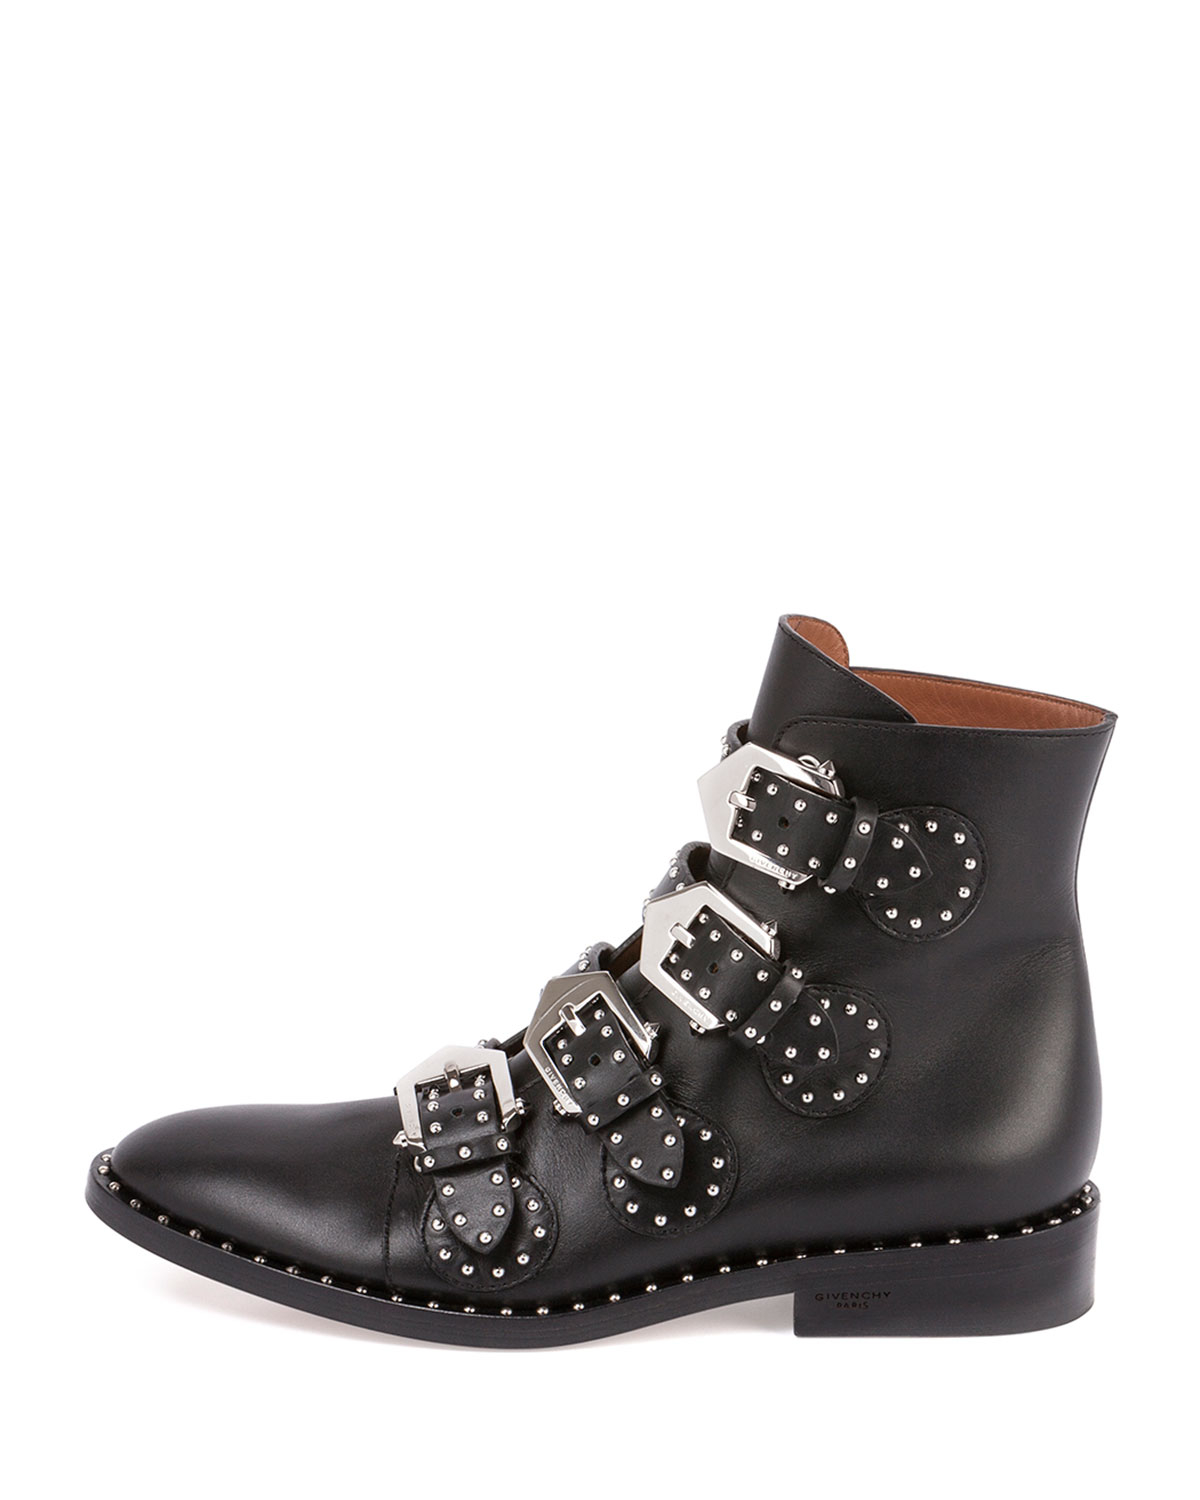 Givenchy Studded Leather Ankle Boot in Black | Lyst